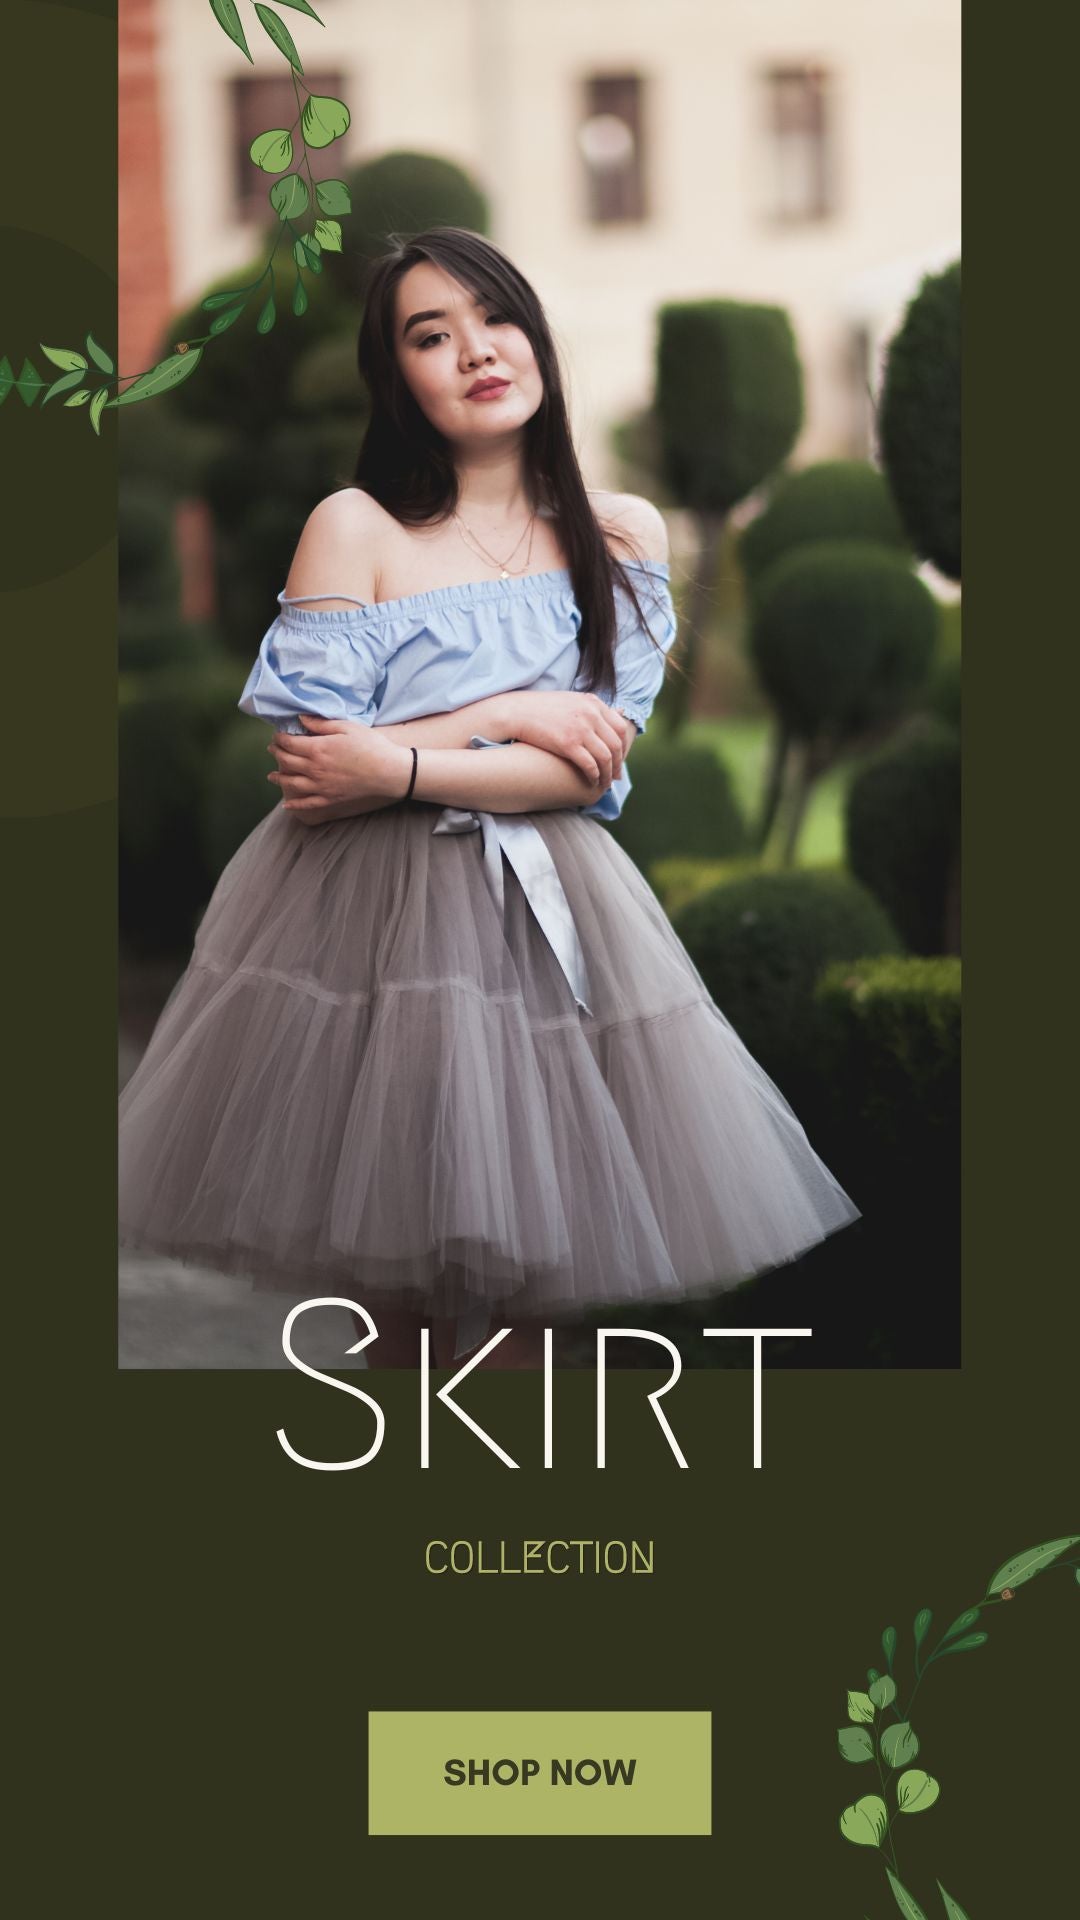 Elegant Women's Skirts Collection | Trendy, Chic & Comfortable Styles